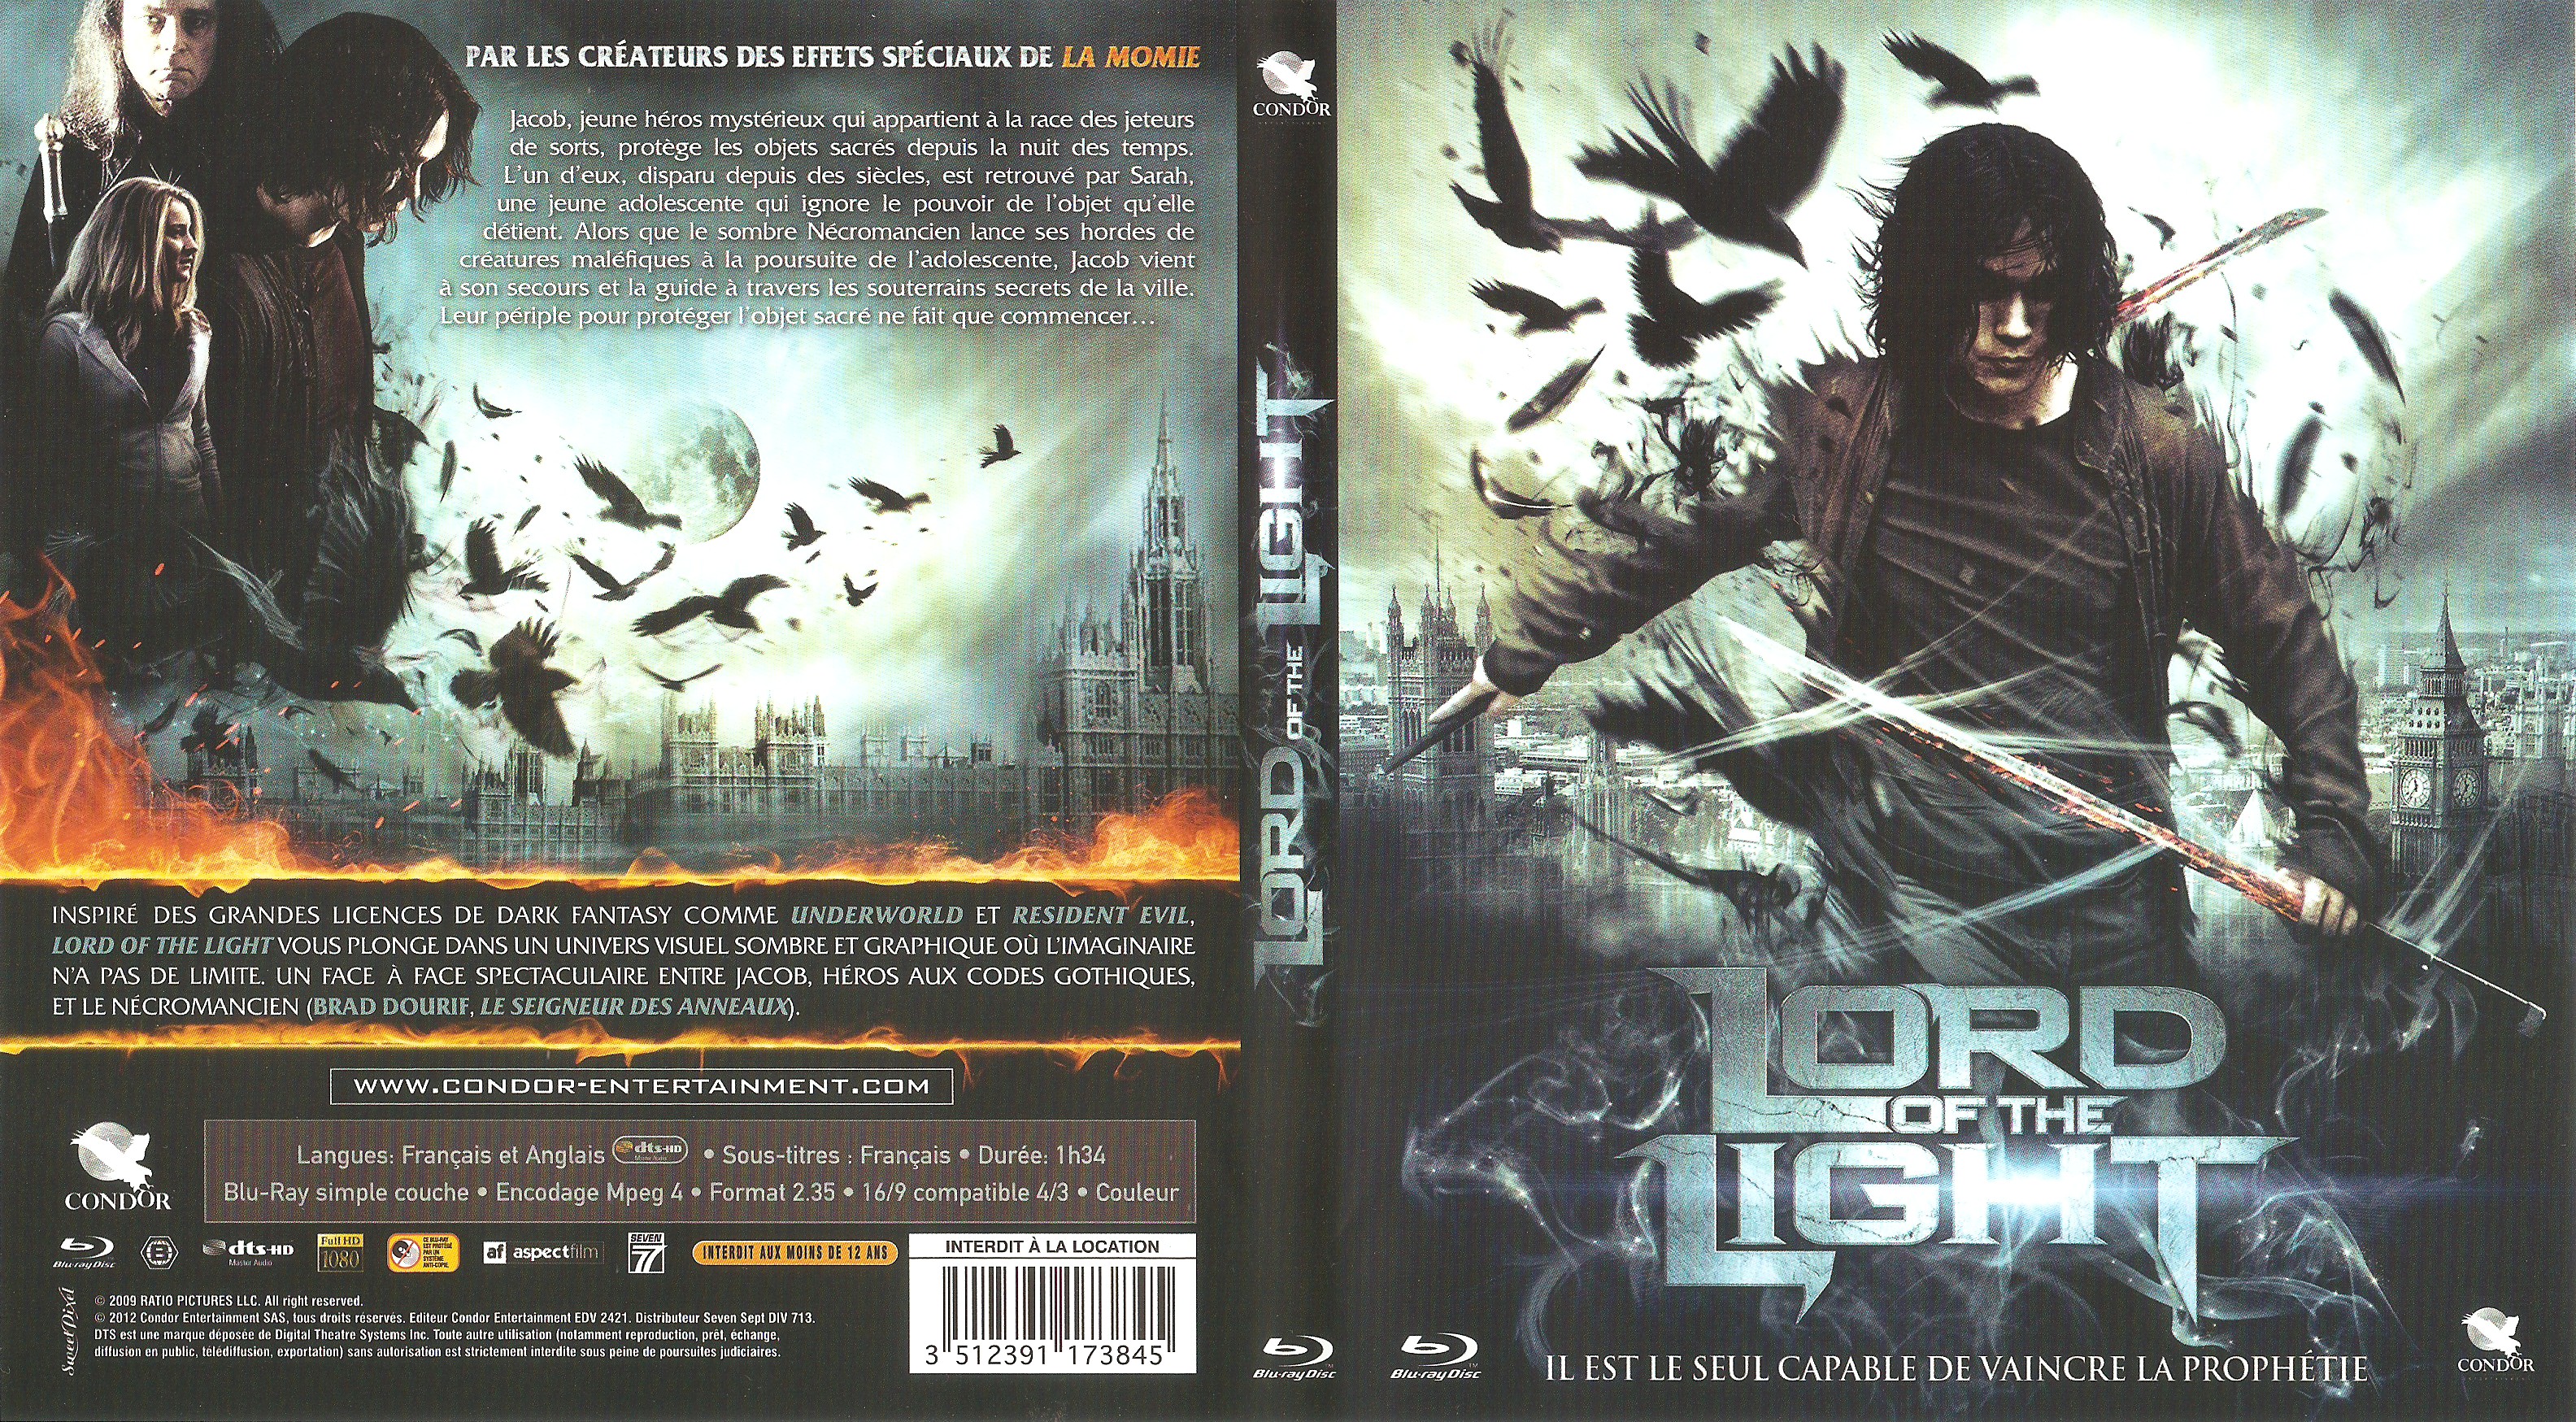 Jaquette DVD Lord of the light (BLU-RAY)